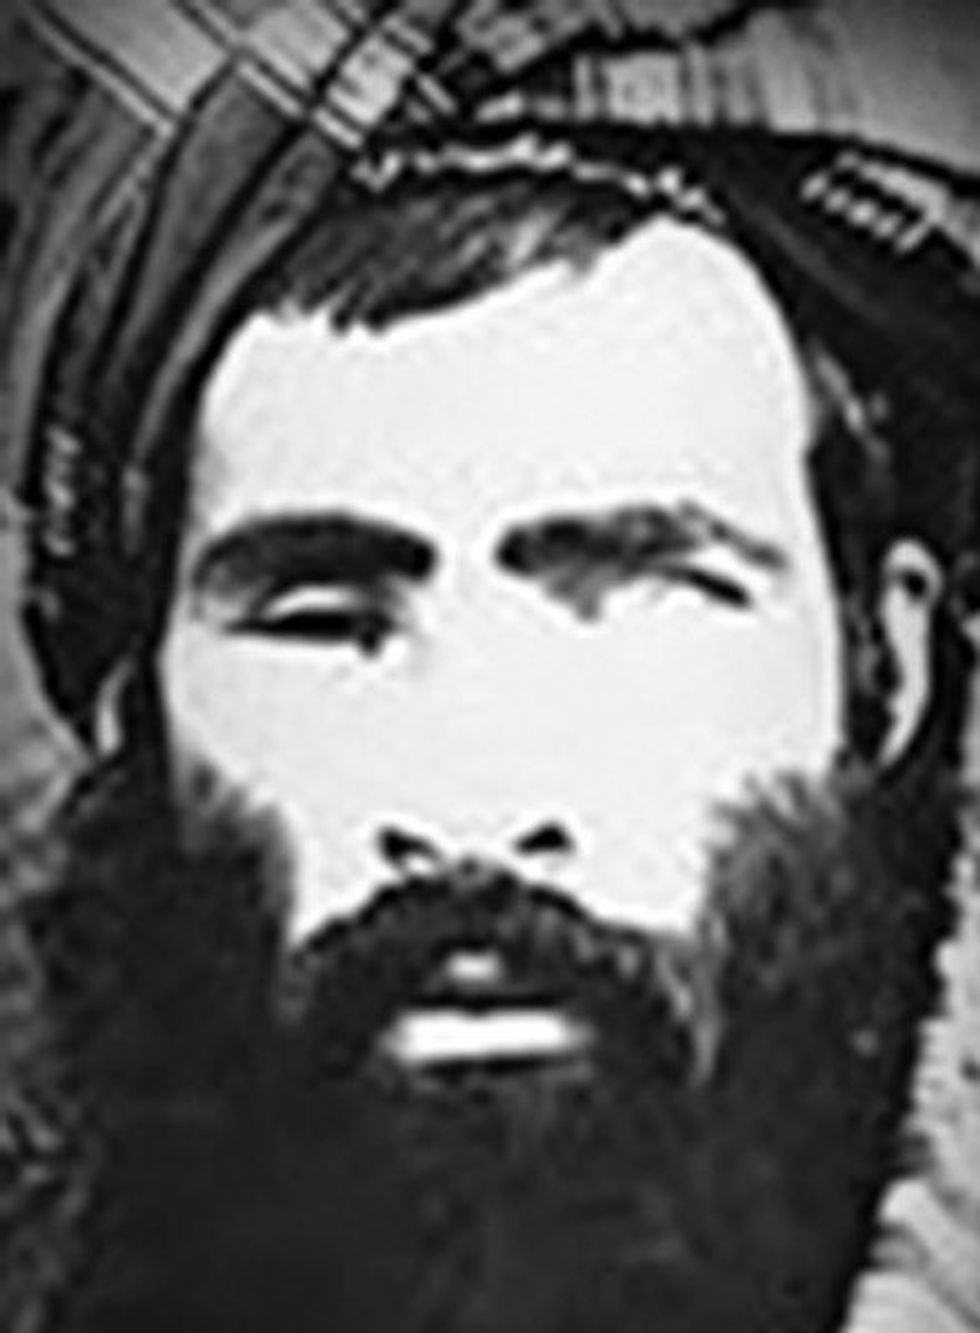 Taliban Appoints New Leader After Mullah Omar’s Death